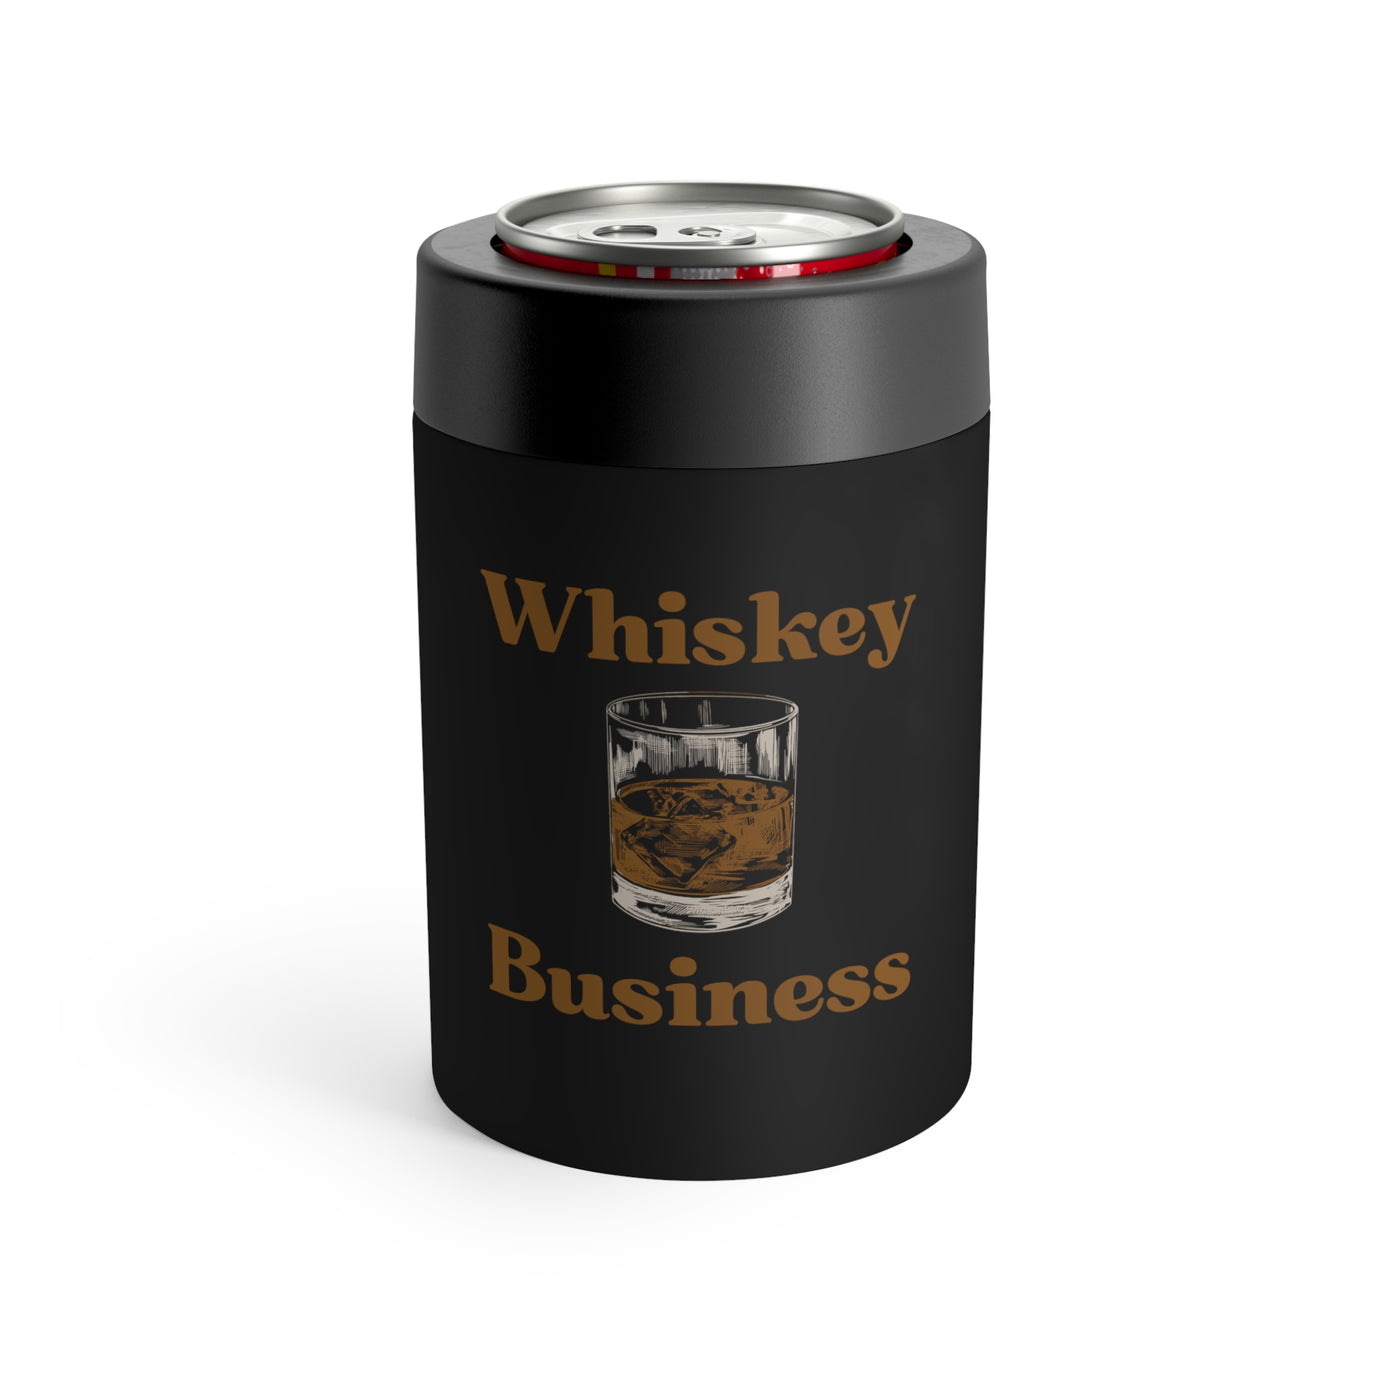 Whiskey Business Stainless Steel Can Holder